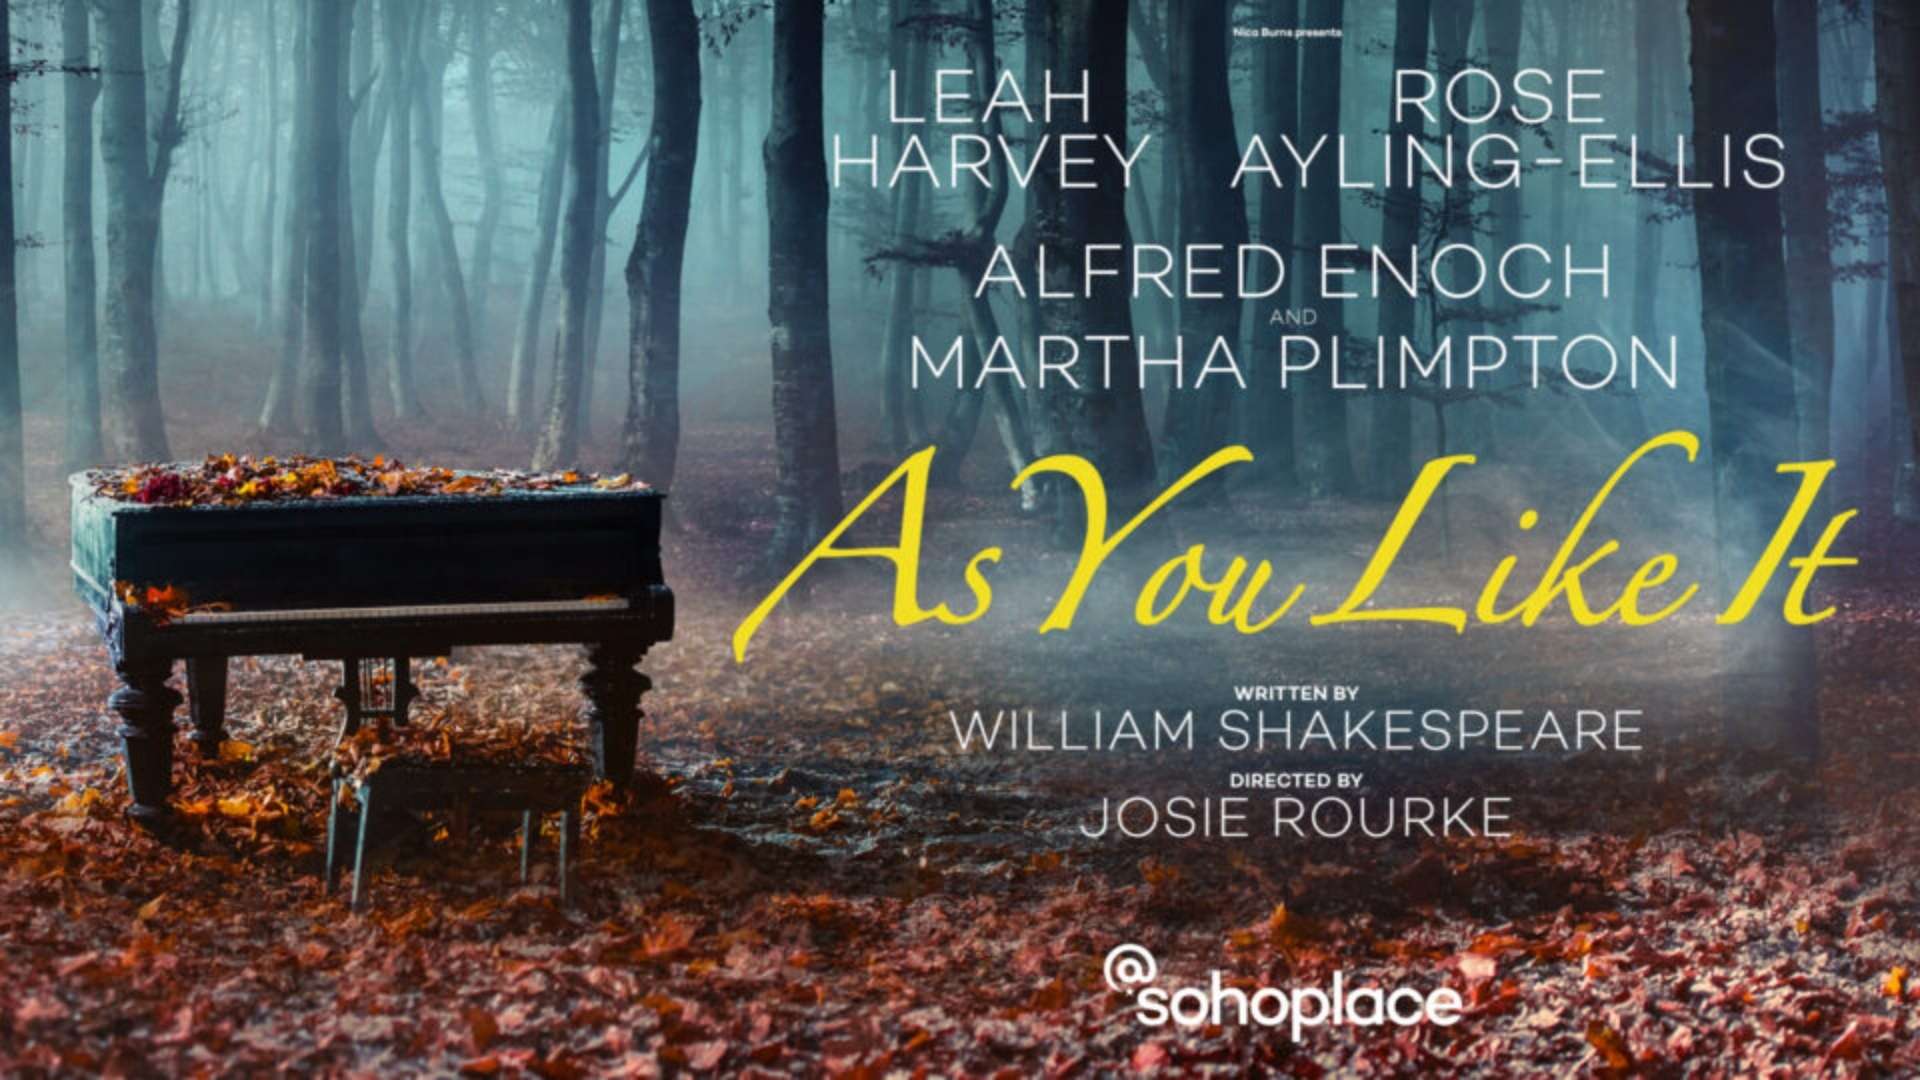 Josie Rourke to Direct As You Like It Starring Leah Harvey, Rose Ayling-Ellis, Alfred Enoch and Martha Plimpton at @sohoplace